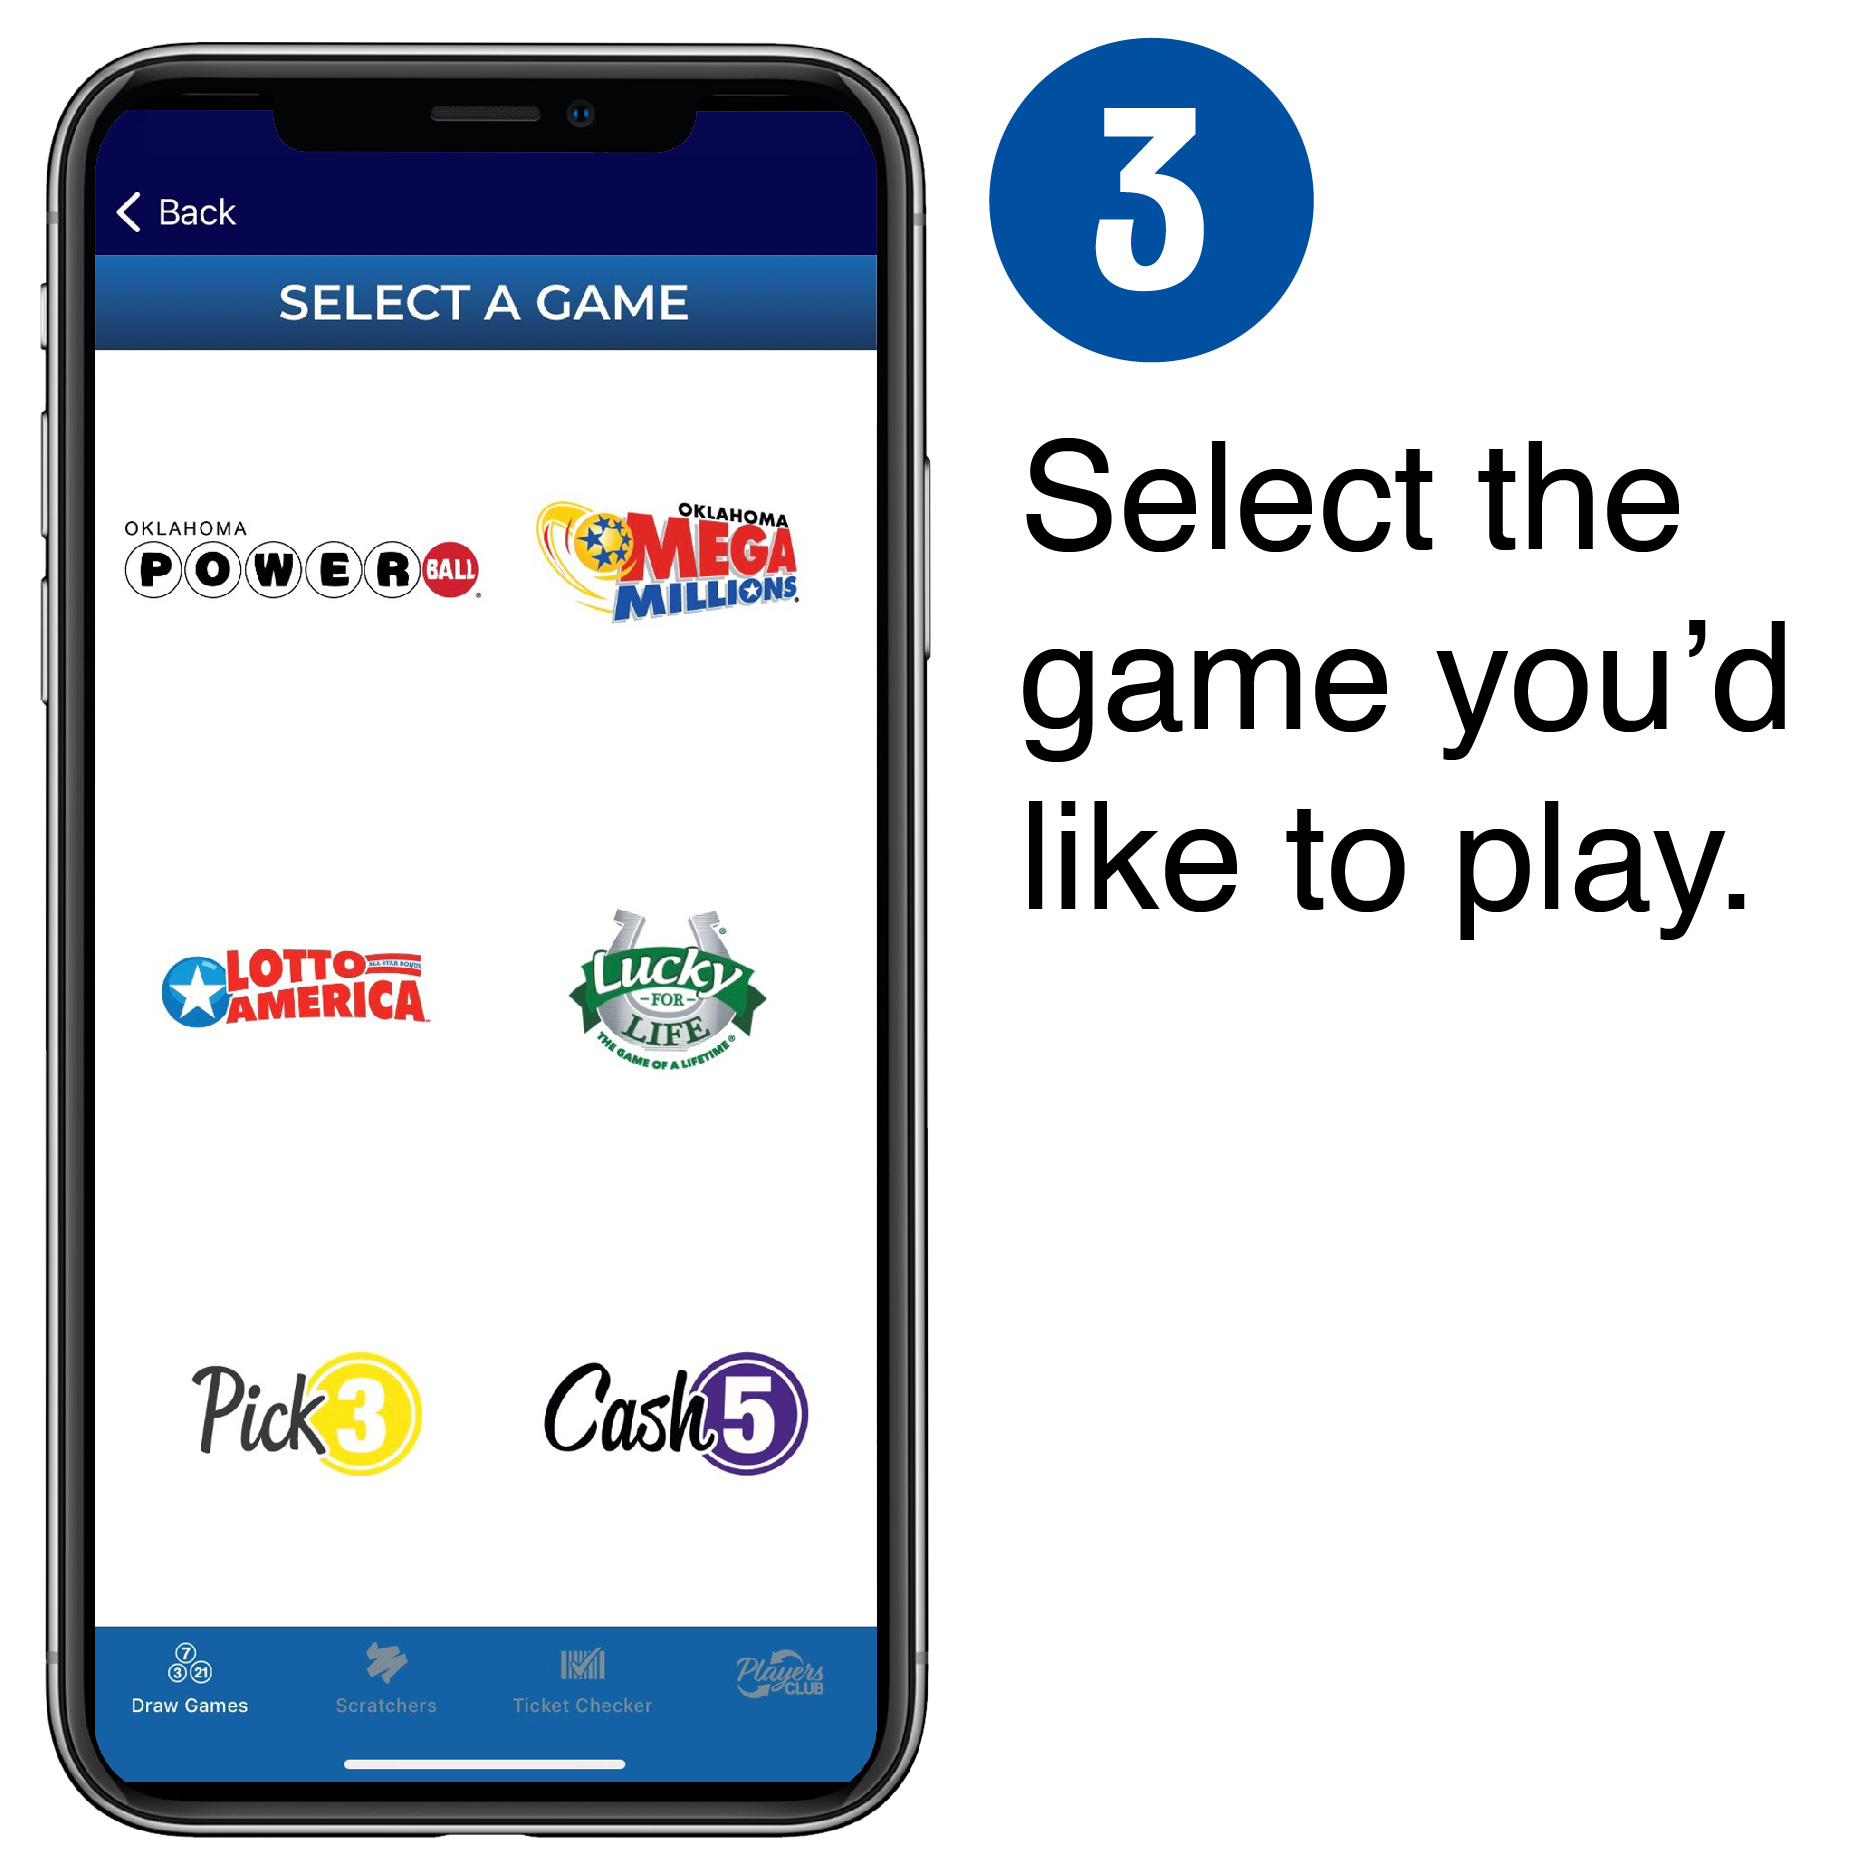 3. select the game you'd like to play'